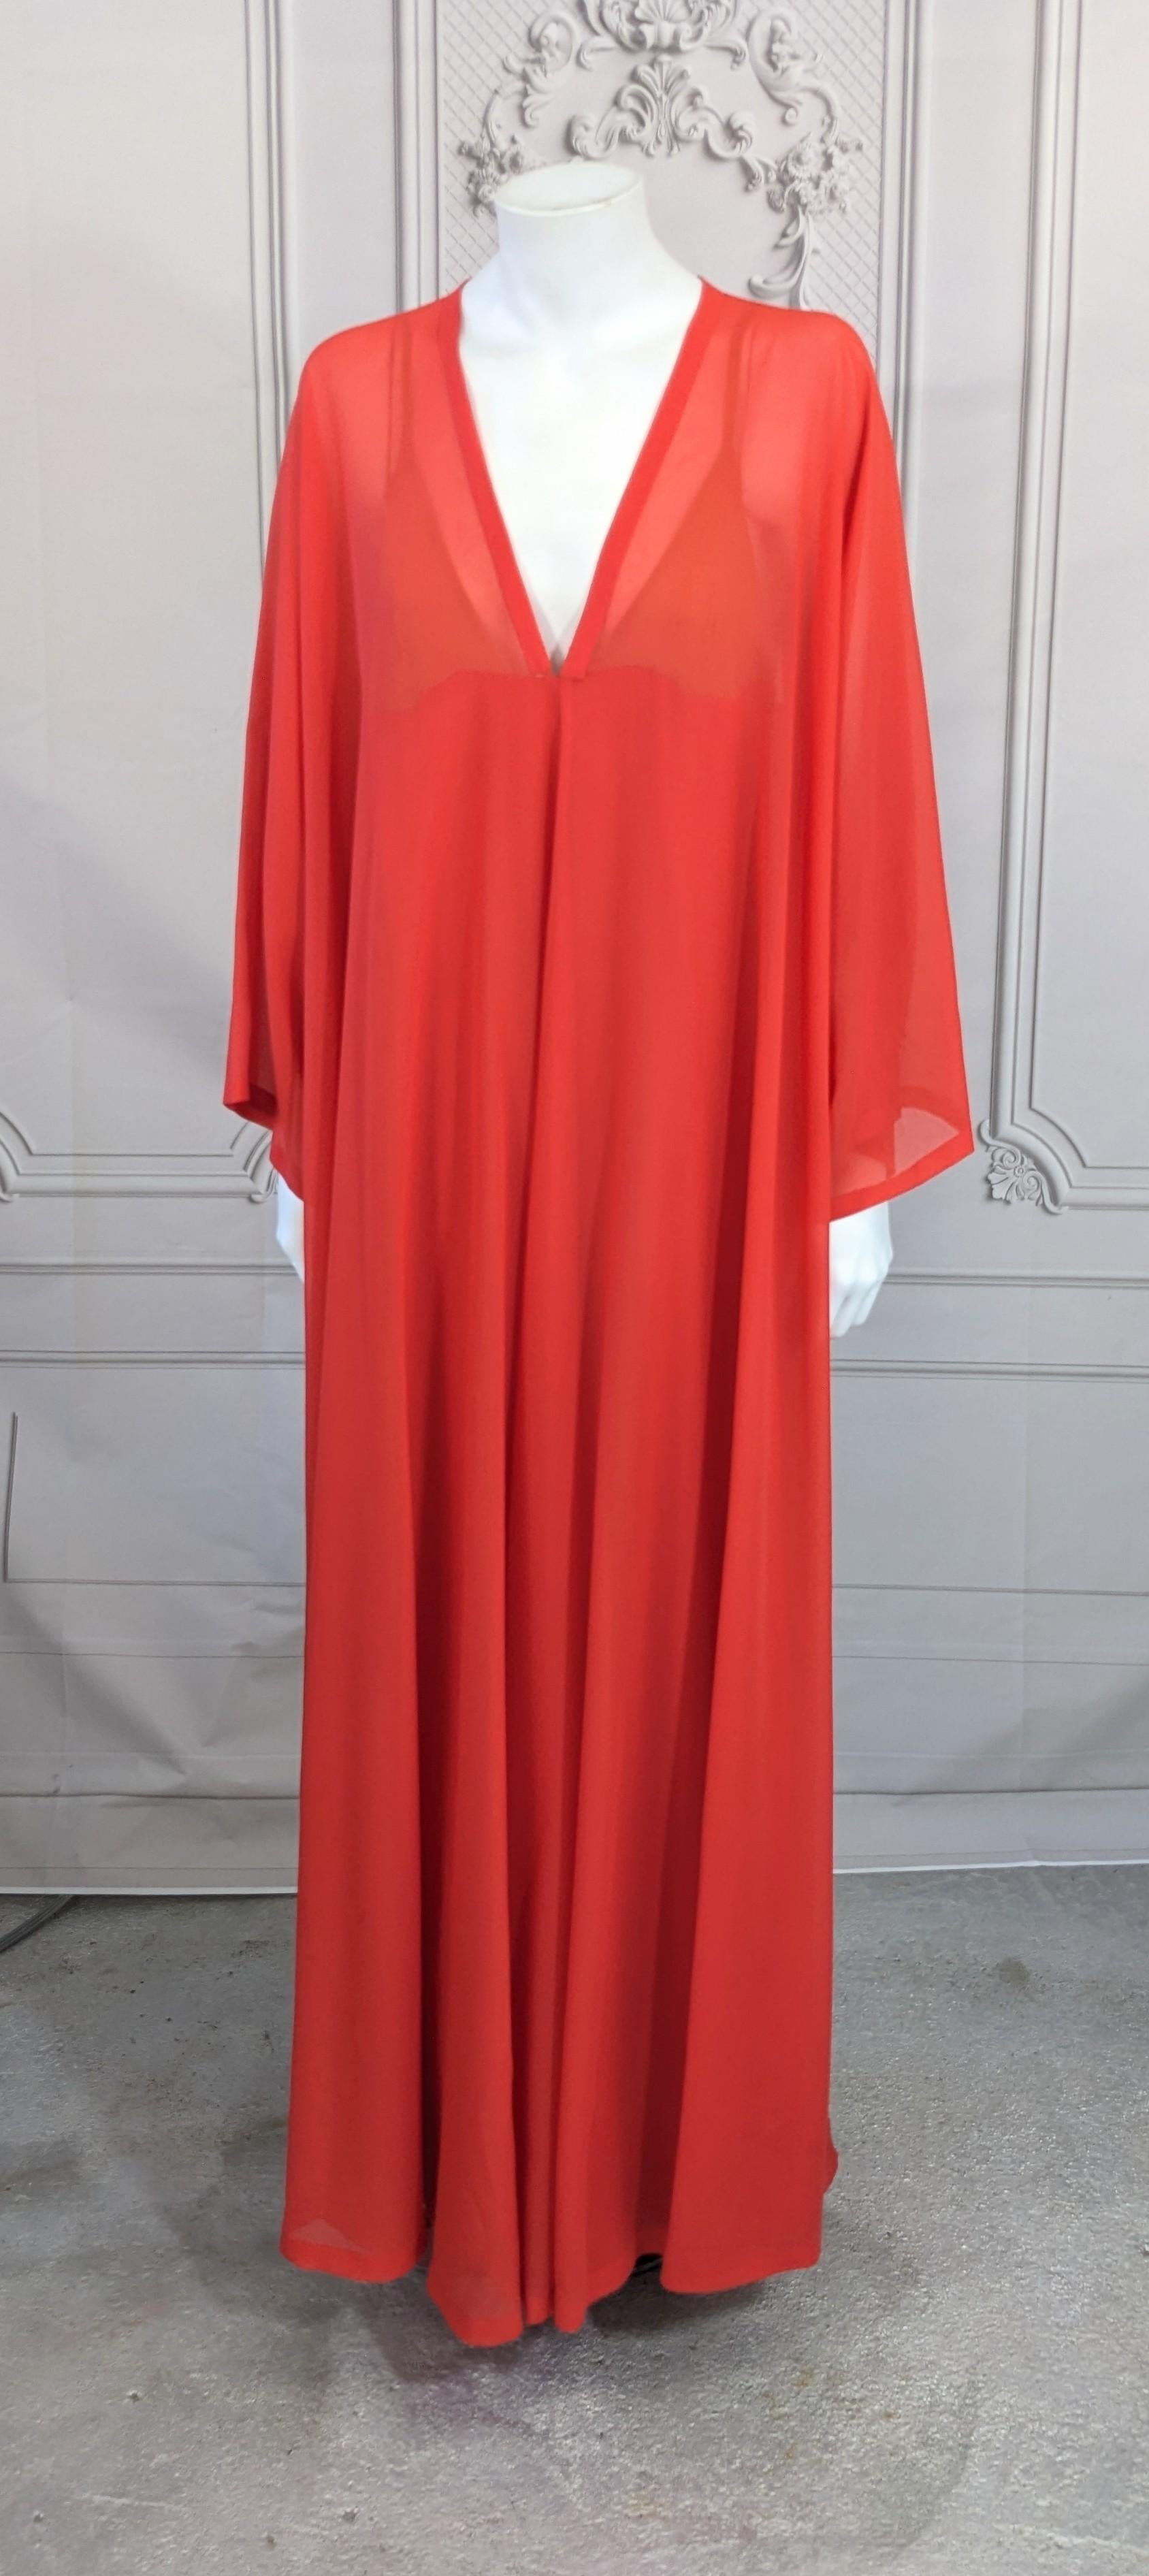 Elegant Tomato Red Lanvin Georgette Caftan from the 1970's France. Oversized sheer rayon georgette caftan slips over the head with a matching slip in rayon crepe and nude chiffon. Slip zips up the side. 1970's France. Size Medium. 